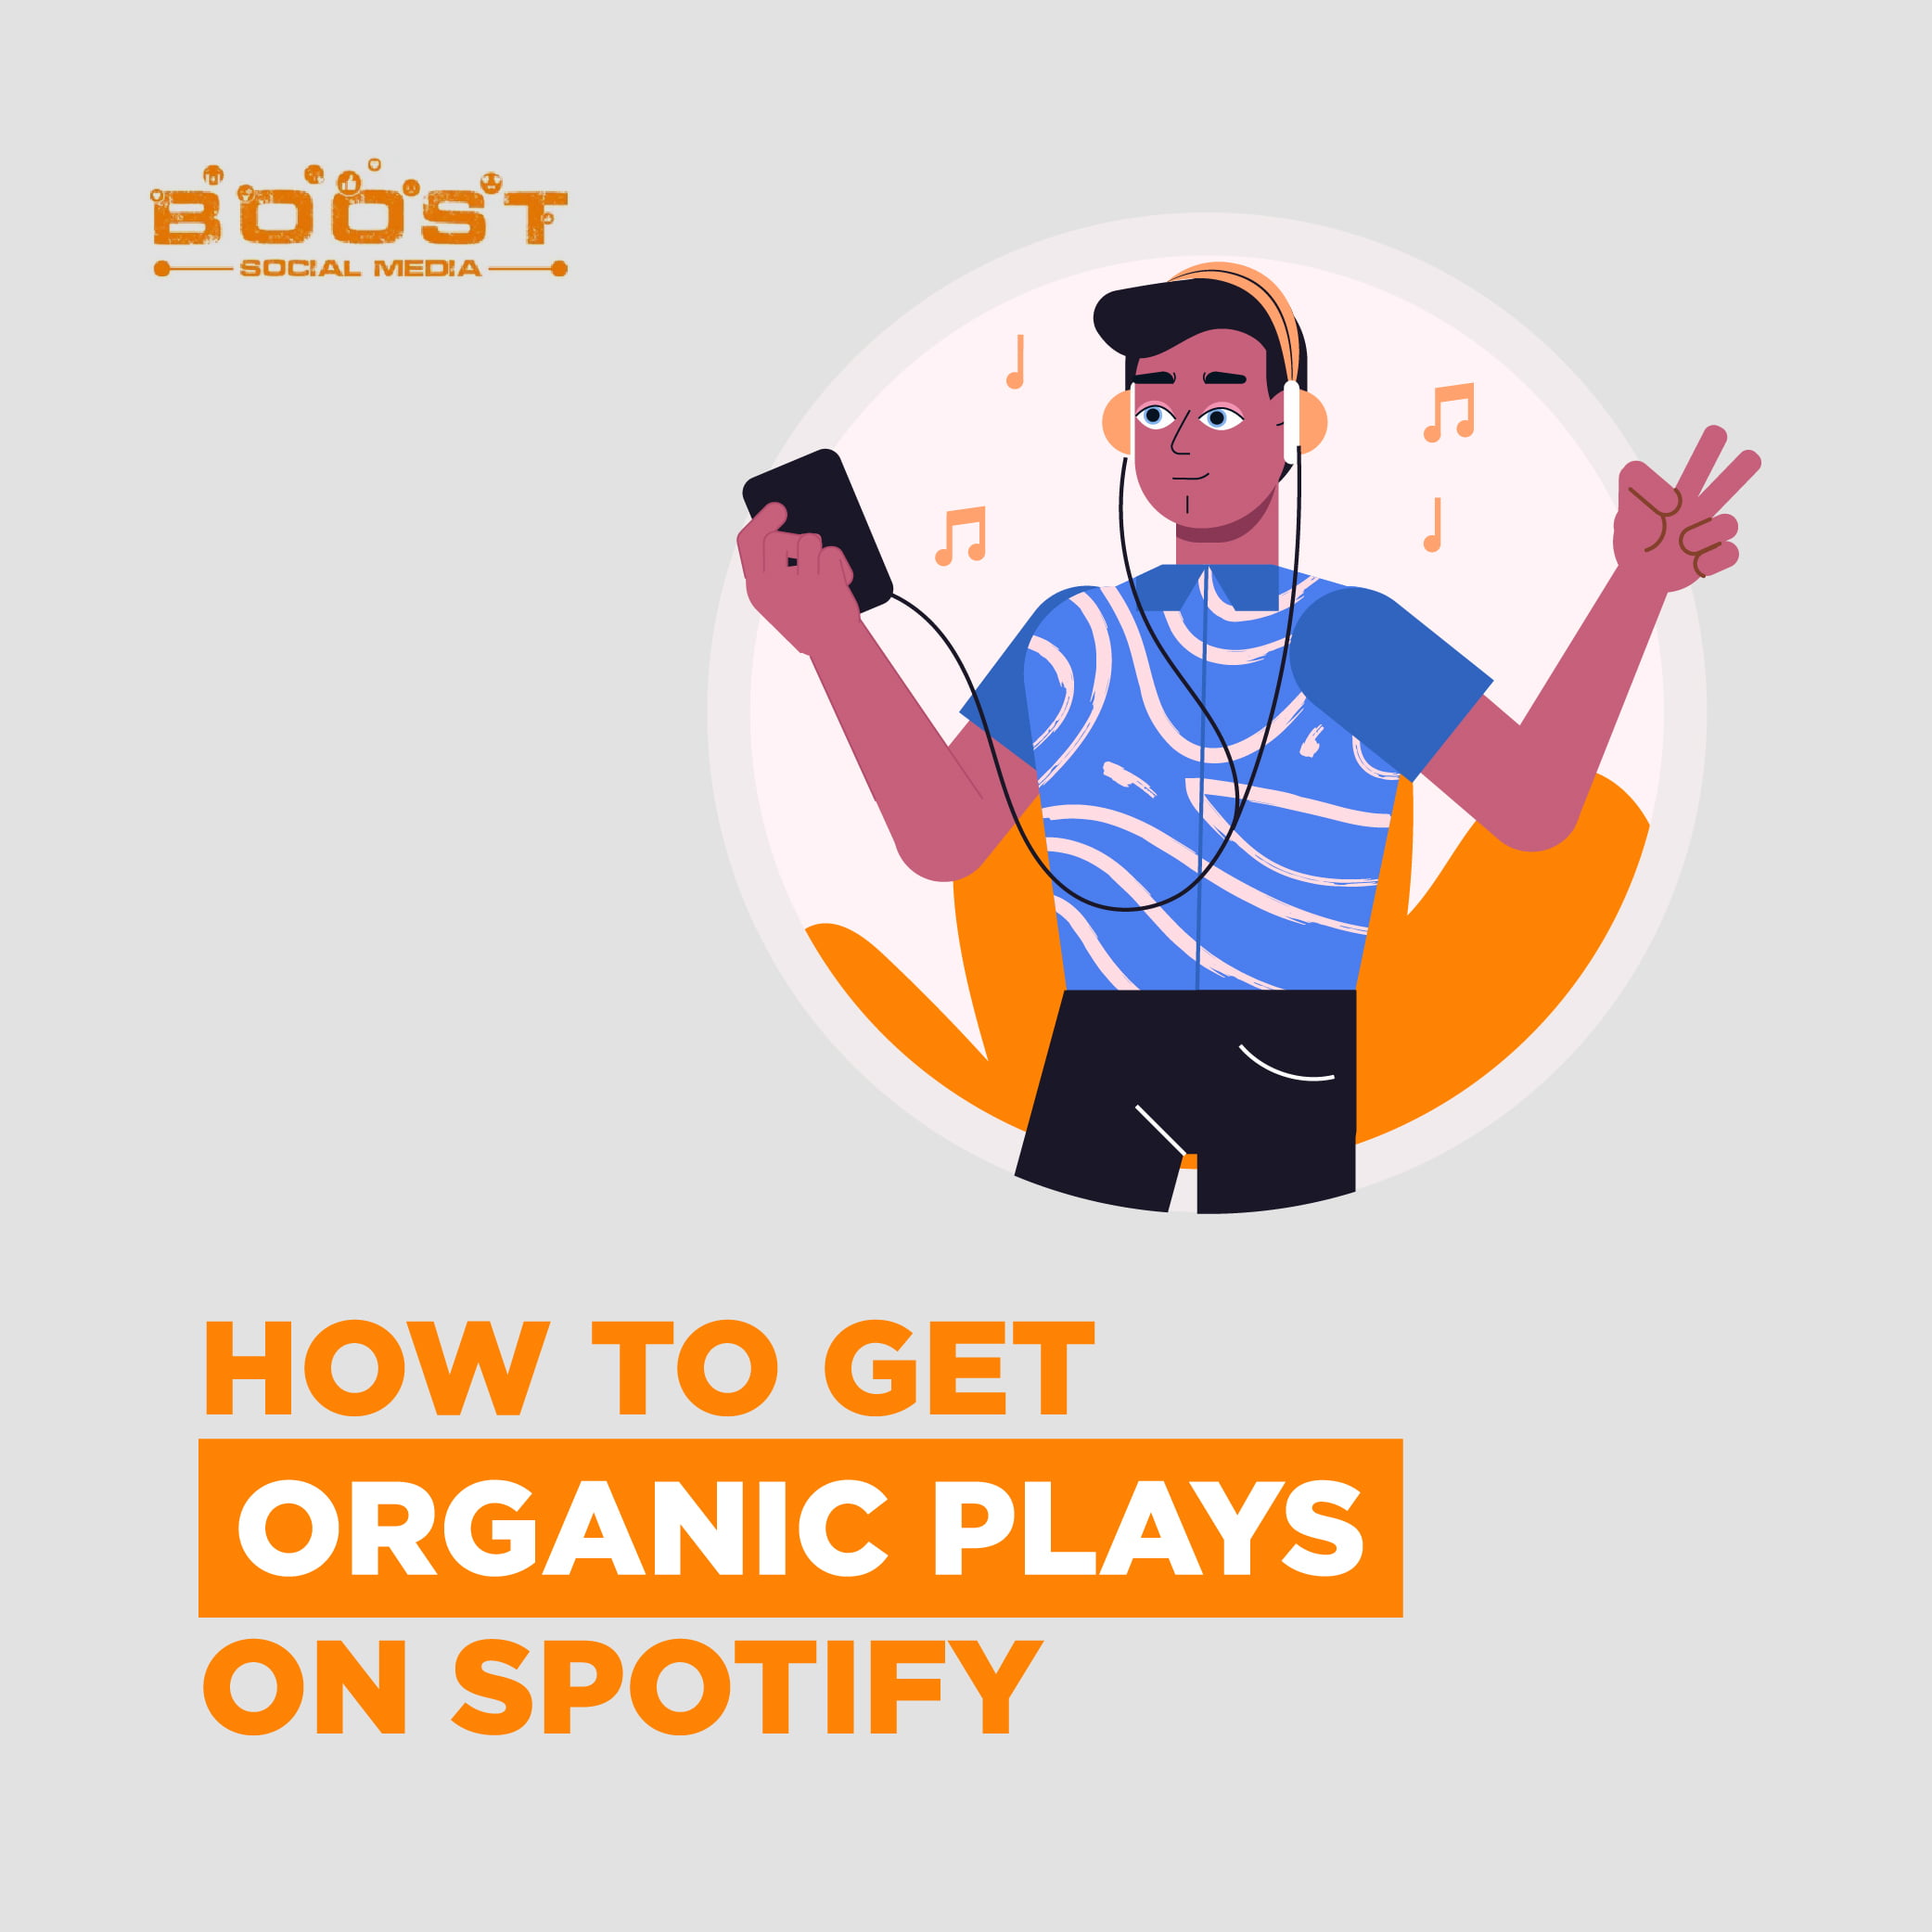 How To Get Organic Plays On Spotify